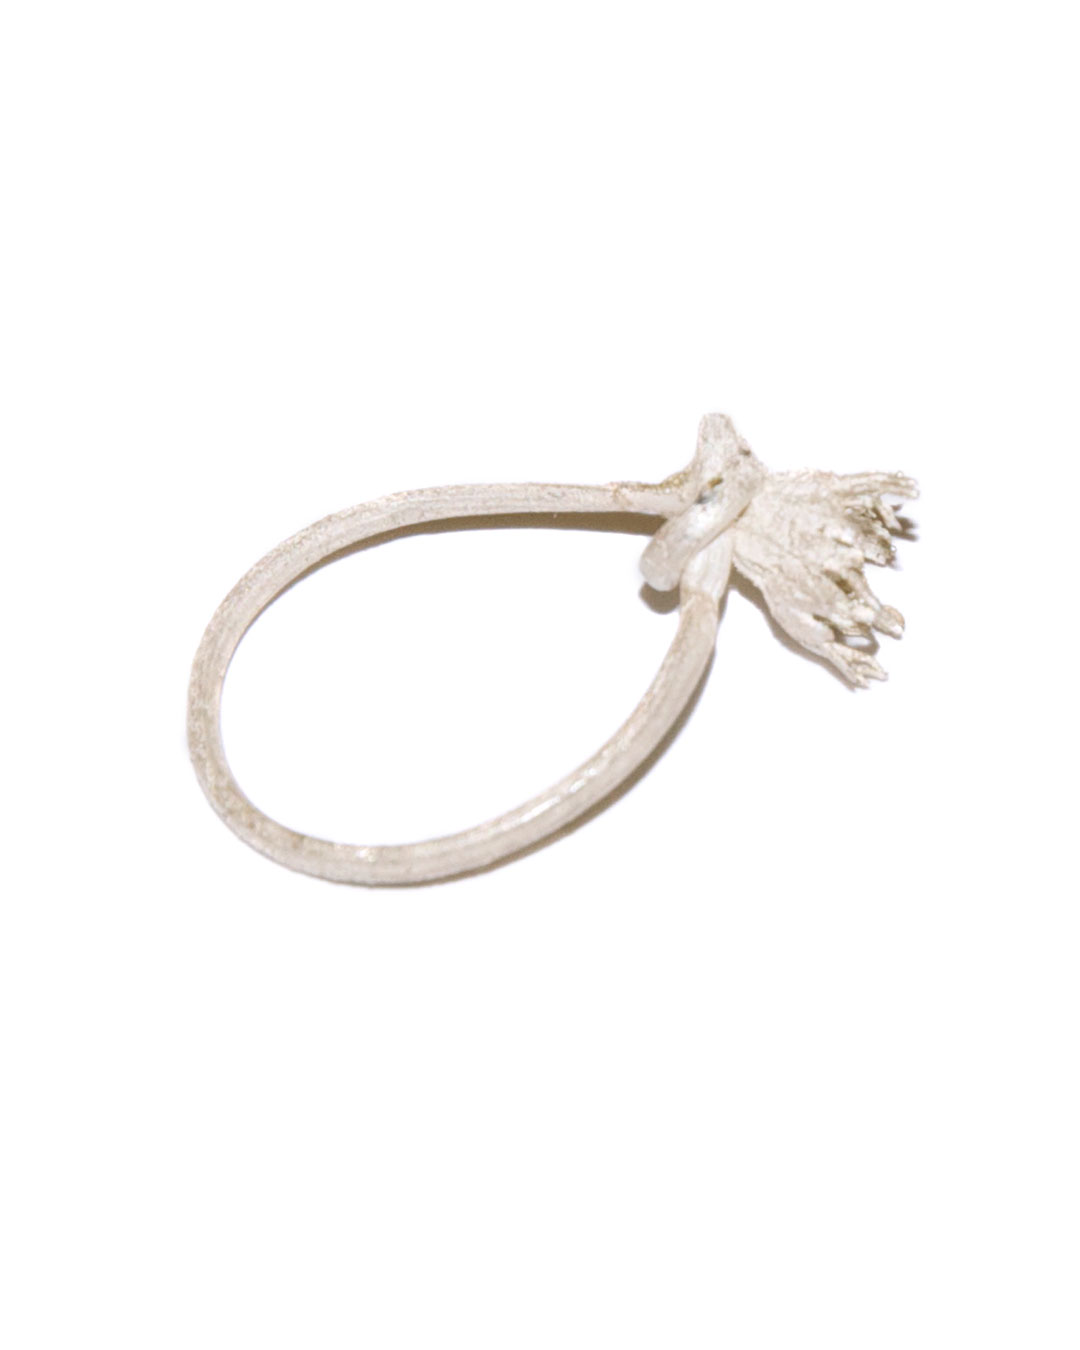 Carla Nuis, Madeliefje, 2005, ring; silver, 33 x 19 x 8 mm, €100